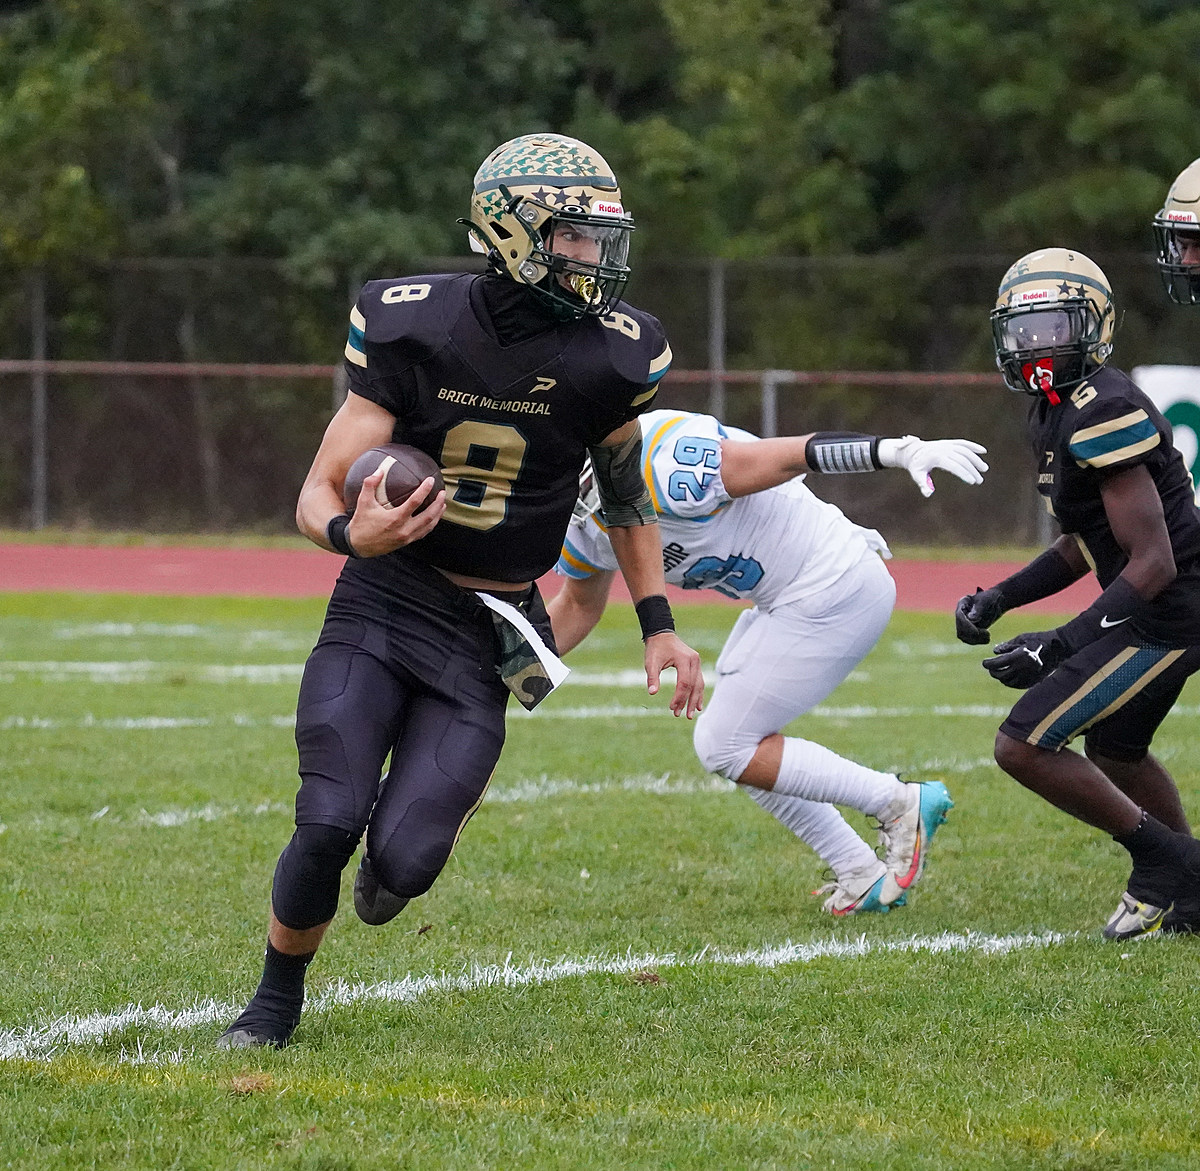 2023 Shore Sports Network All-Shore Football Teams Announced – Outstanding High School Players Recognized